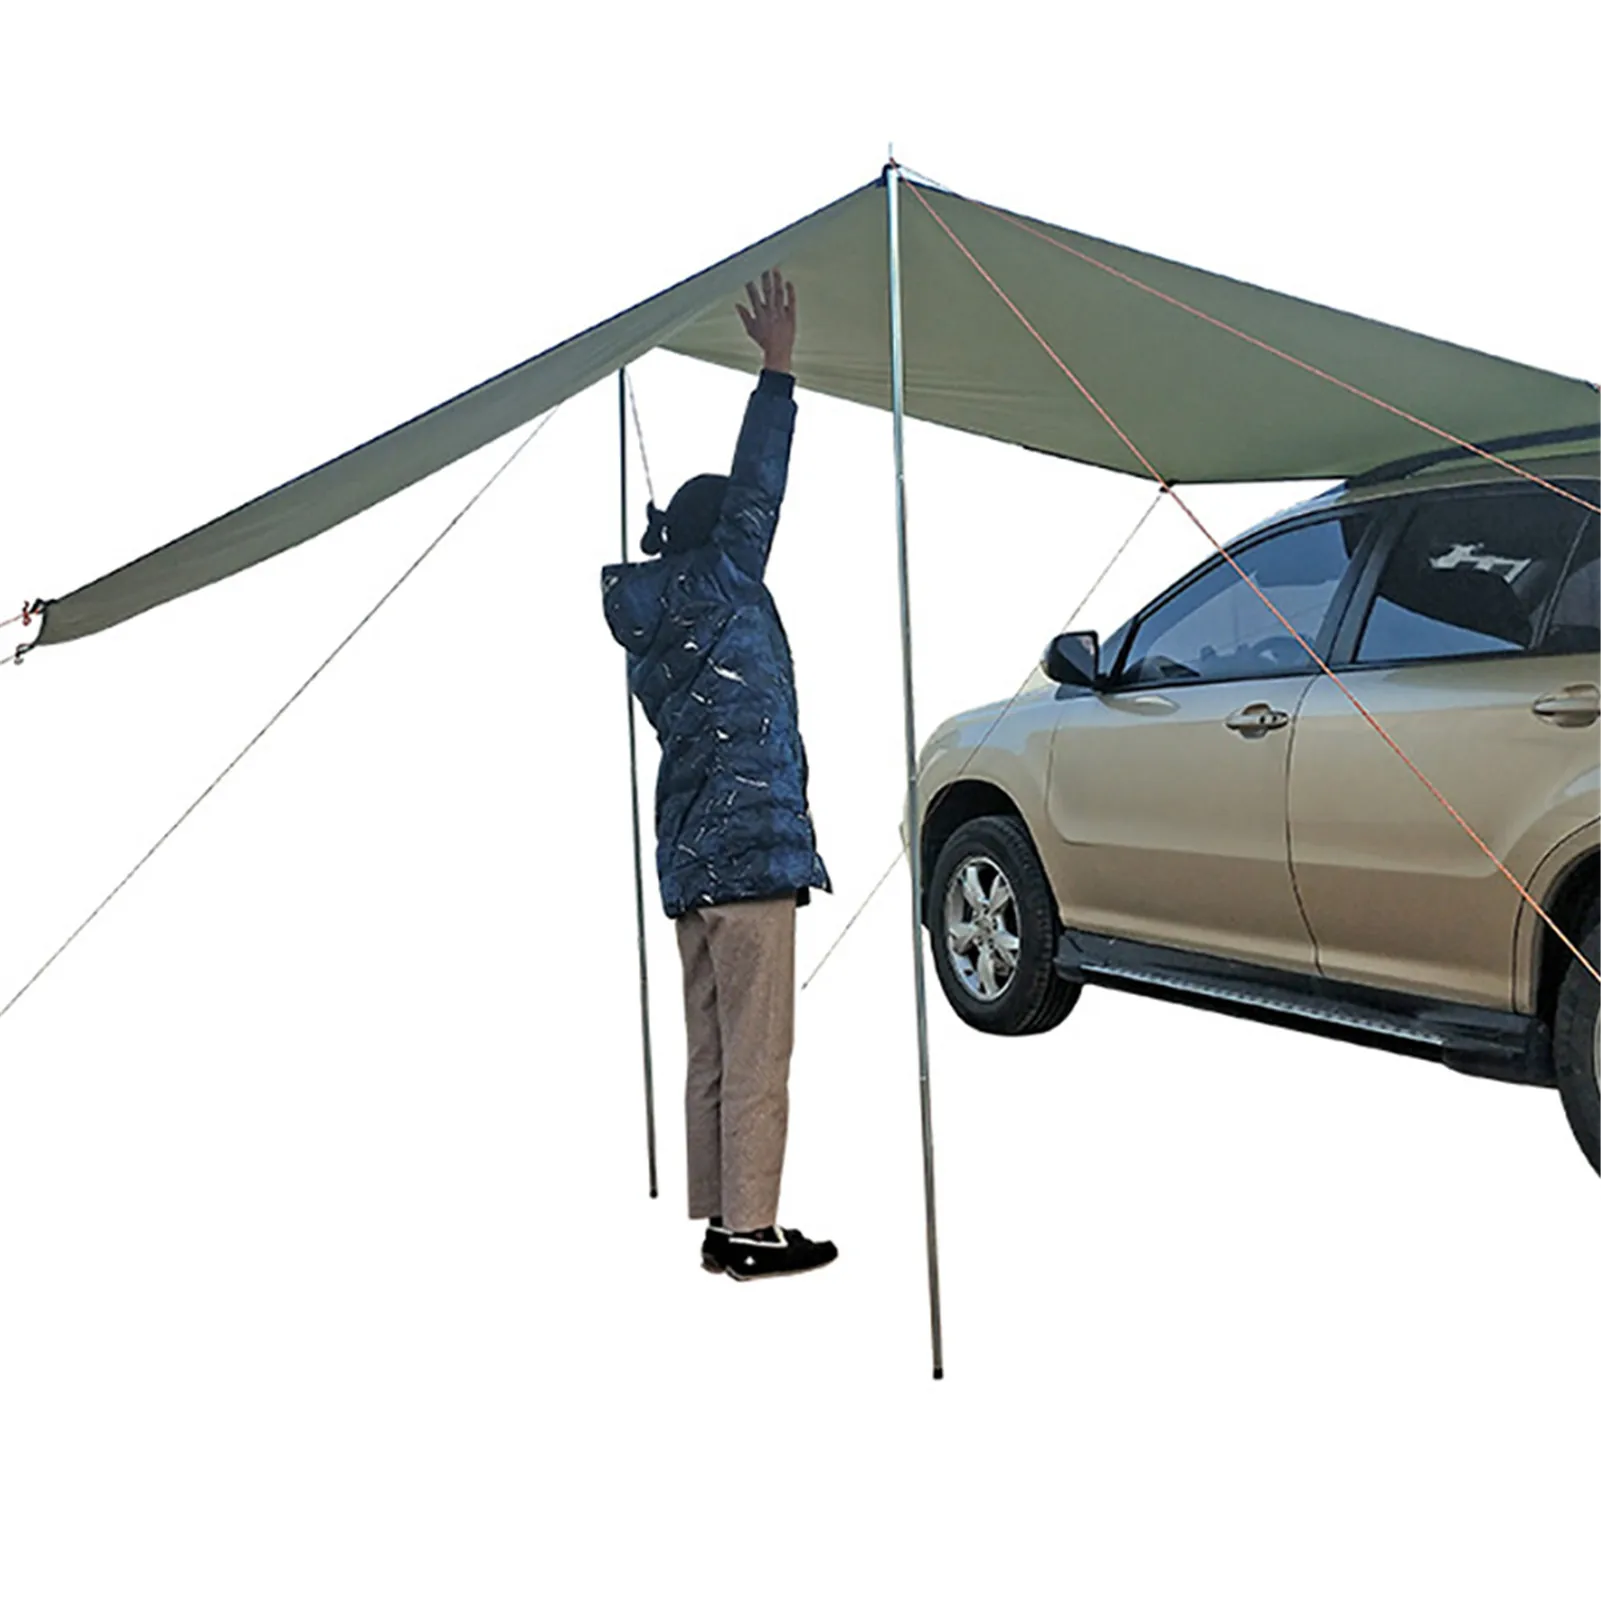 

Car Awning Sunshade Waterproof Sunscreen And Windproof Portable Camping Tent Automobile Rooftop Rain Canopy Outdoor Activities